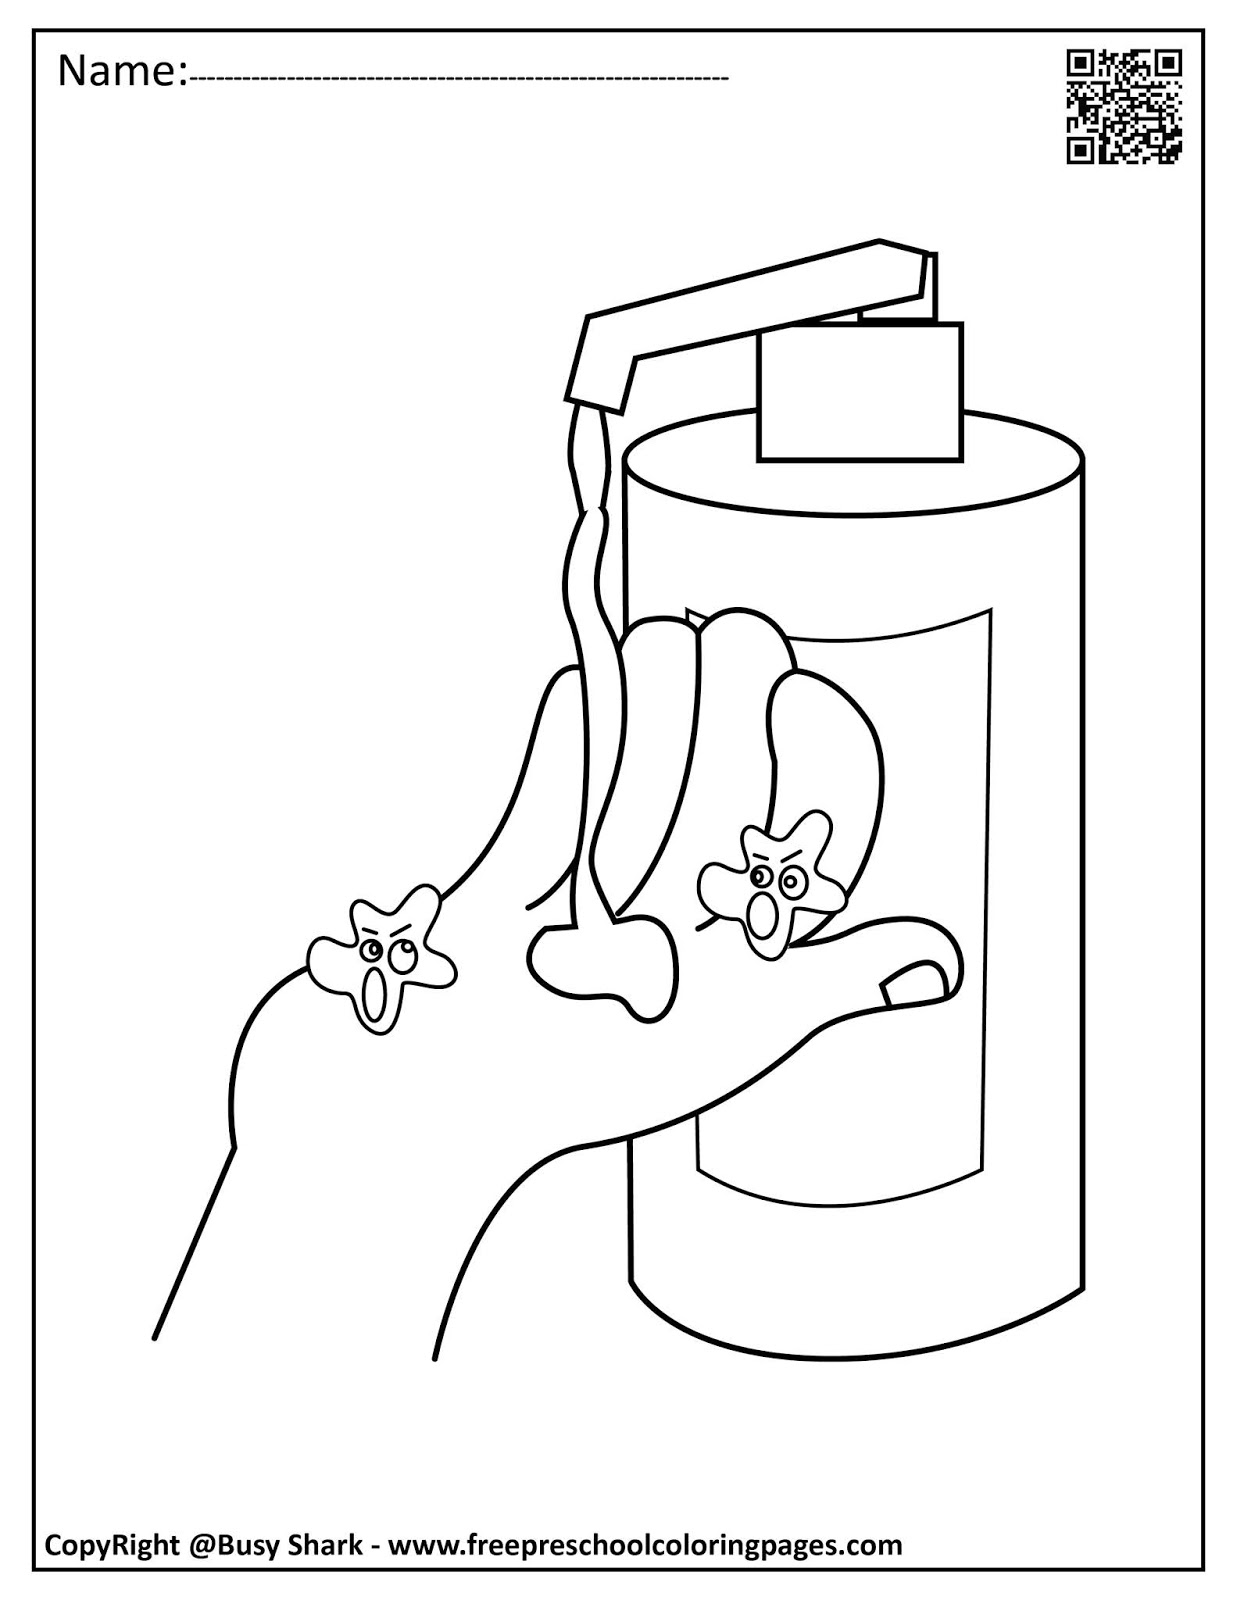 Download Set of Hand Washing and germs coloring pages